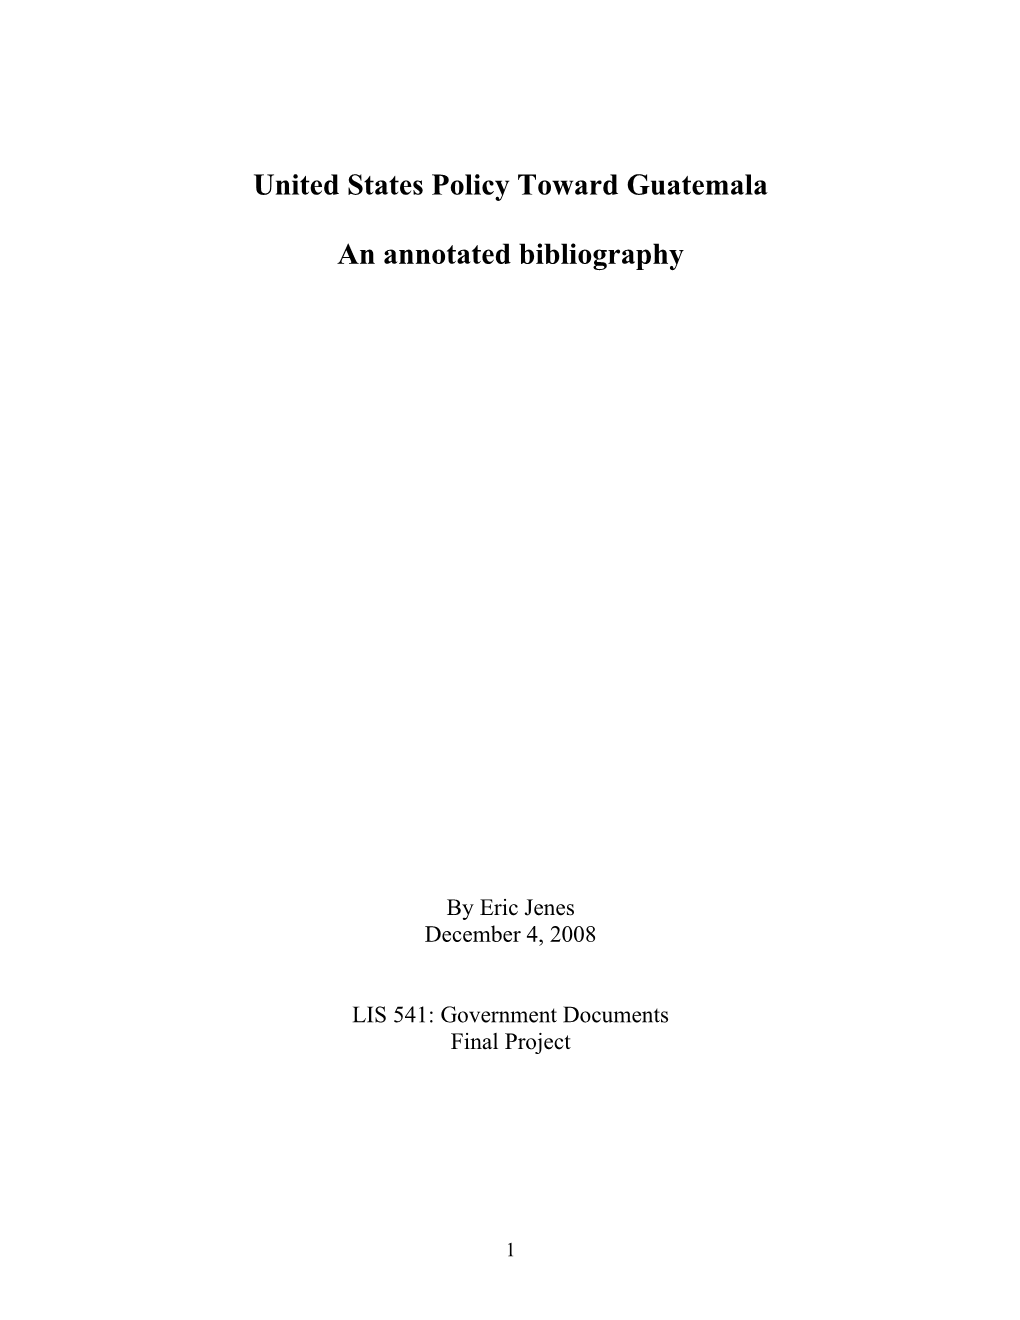 United States Policy Toward Guatemala an Annotated Bibliography